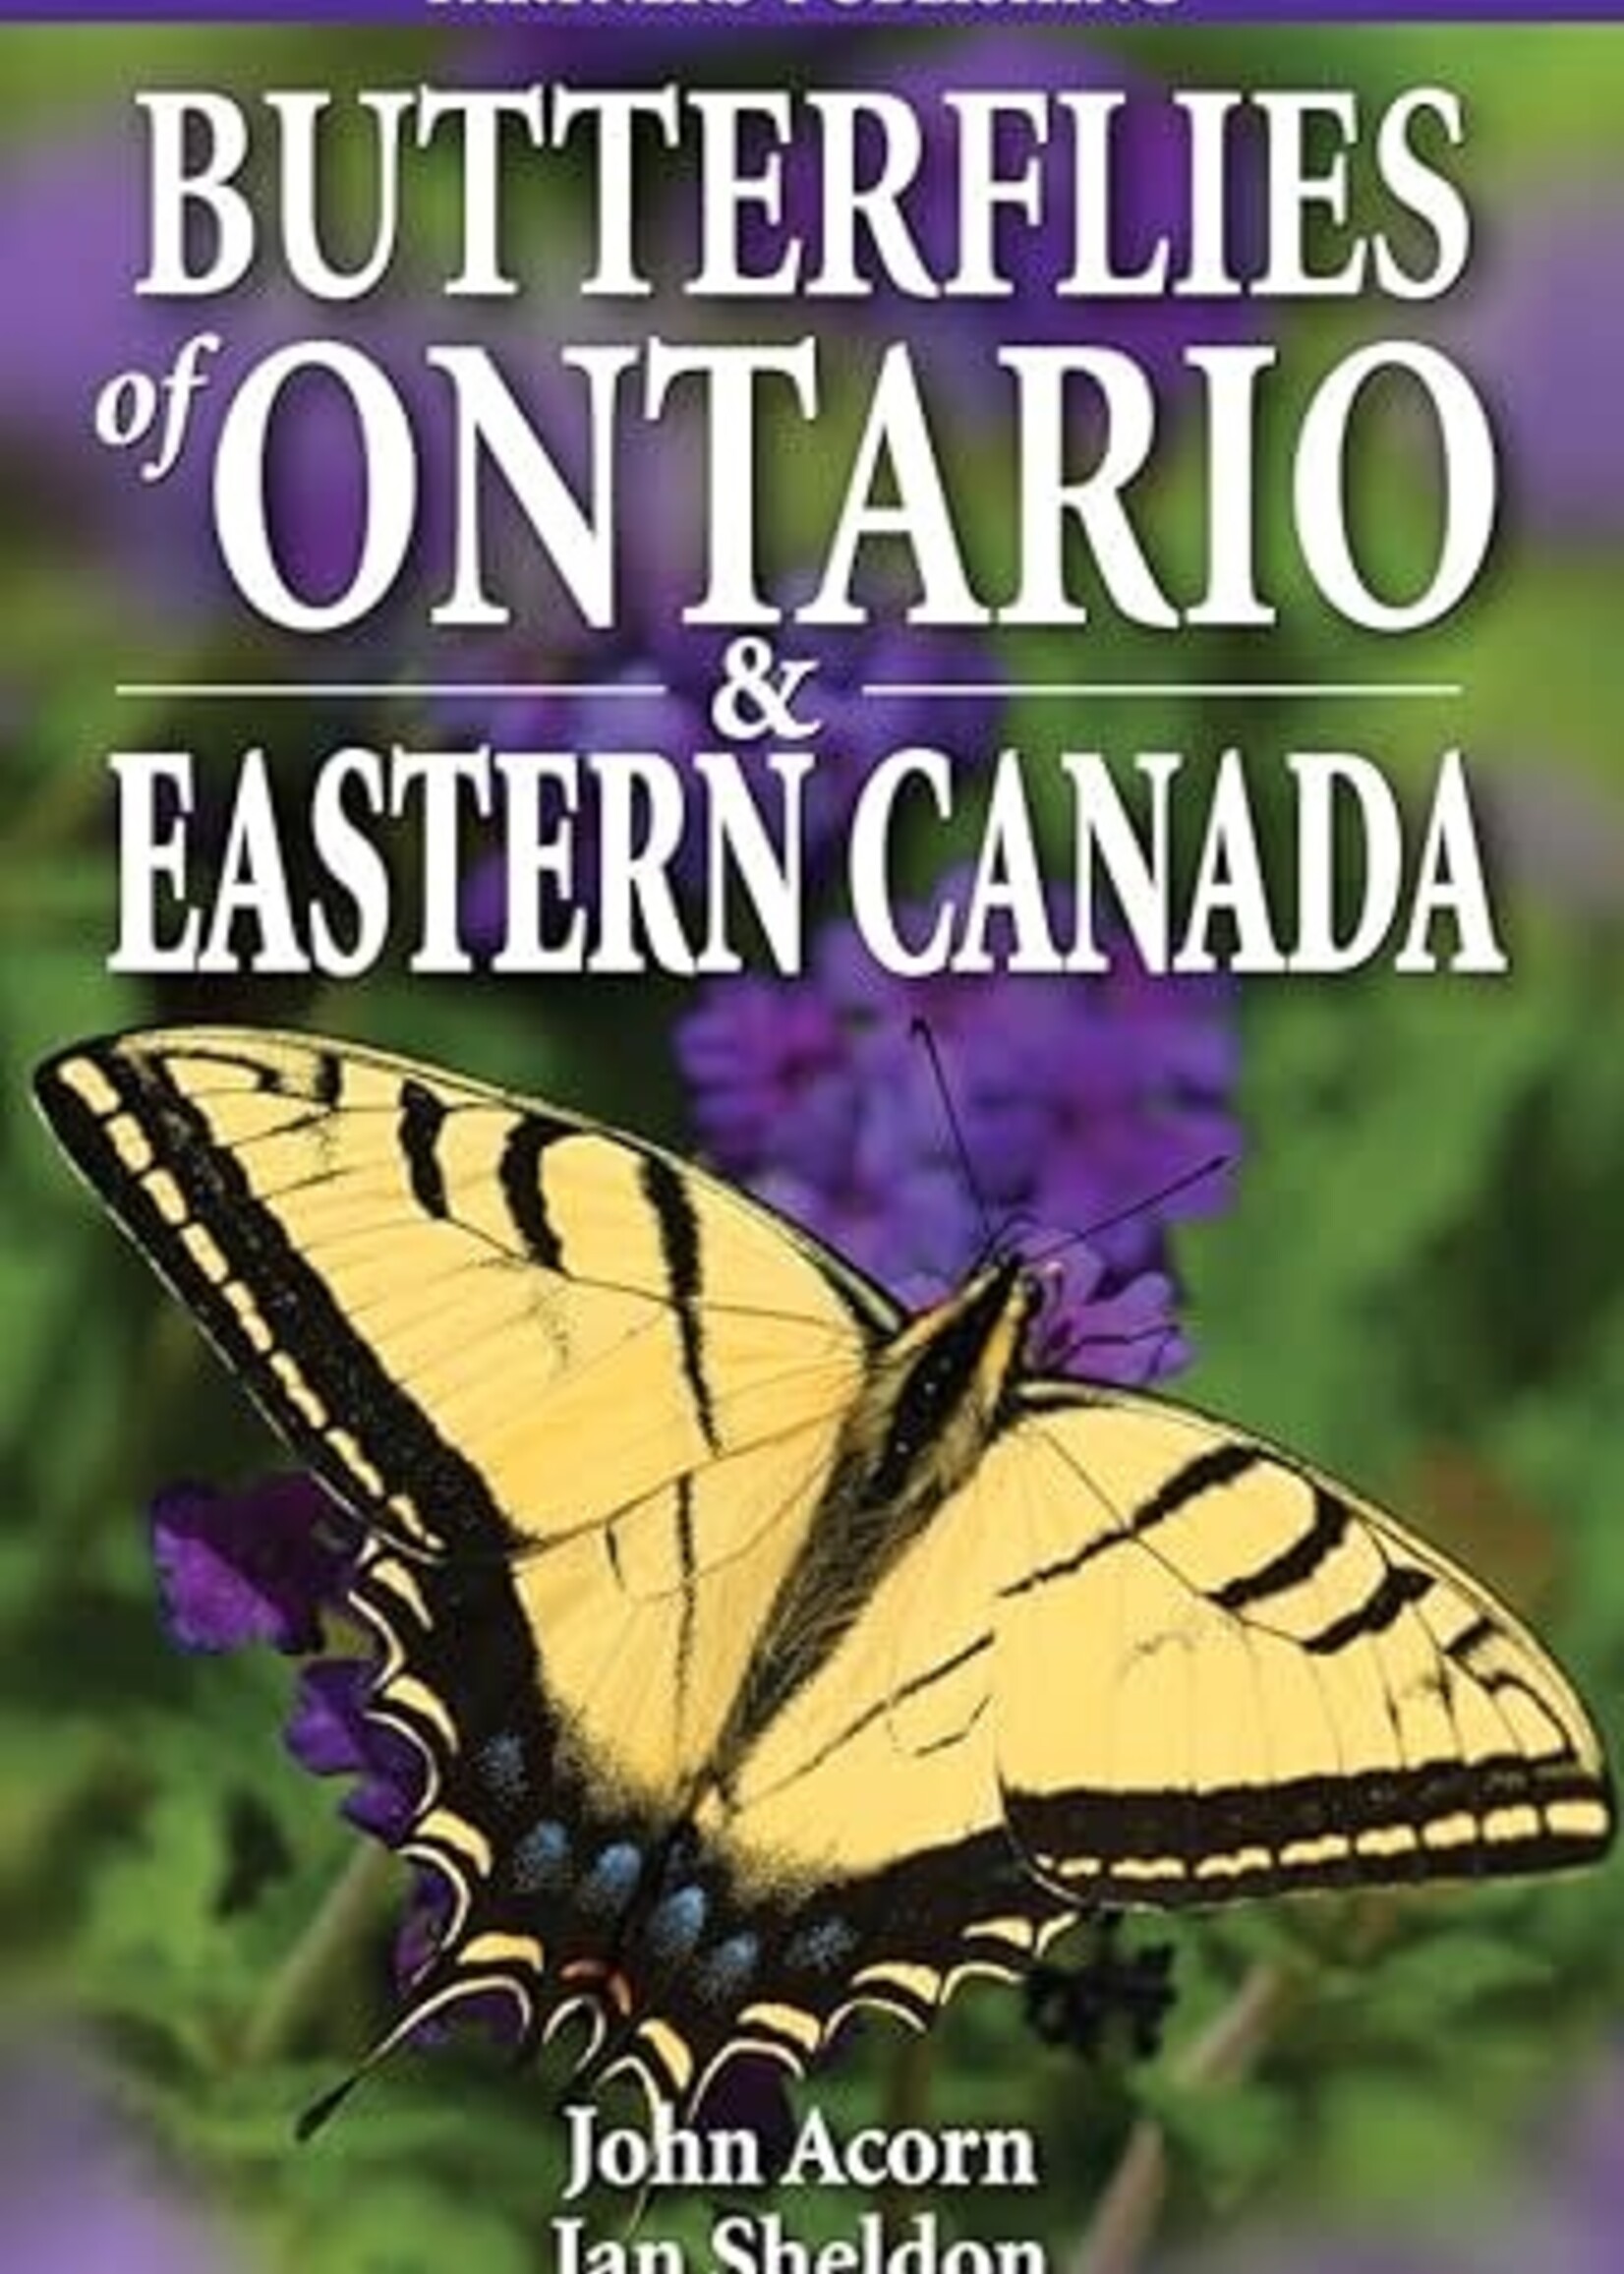 Bruce Trail Conservancy Butterflies of Eastern Ontario & Eastern Canada